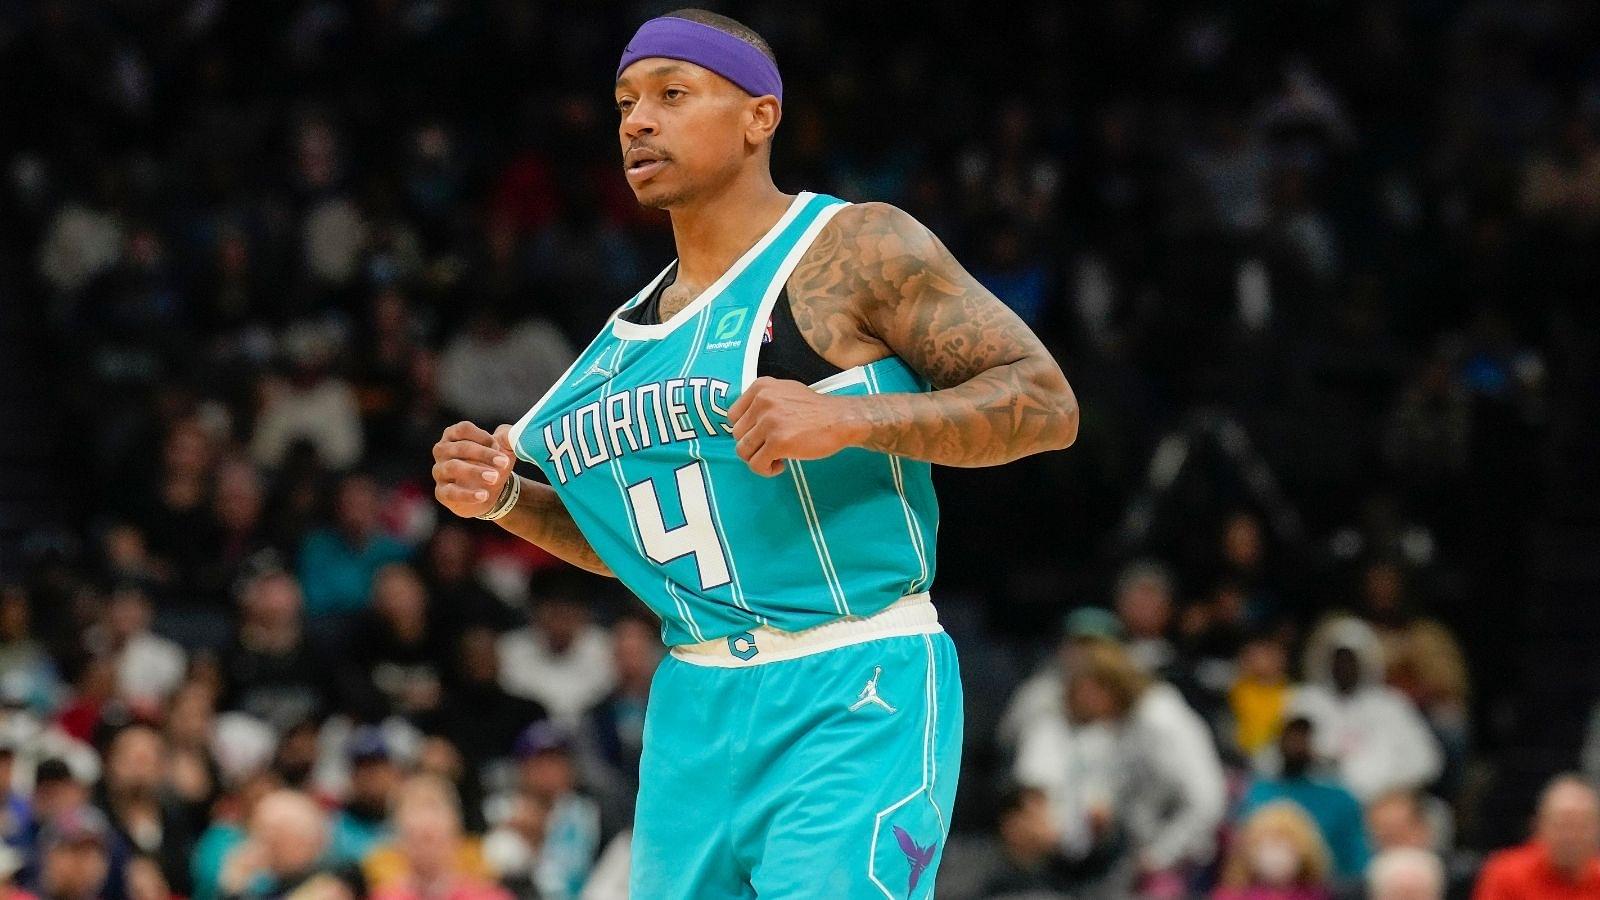 "Isaiah Thomas finally signs a permanent deal with Charlotte Hornets": Michael Jordan and Co give former Celtics star his first long term deal in a while